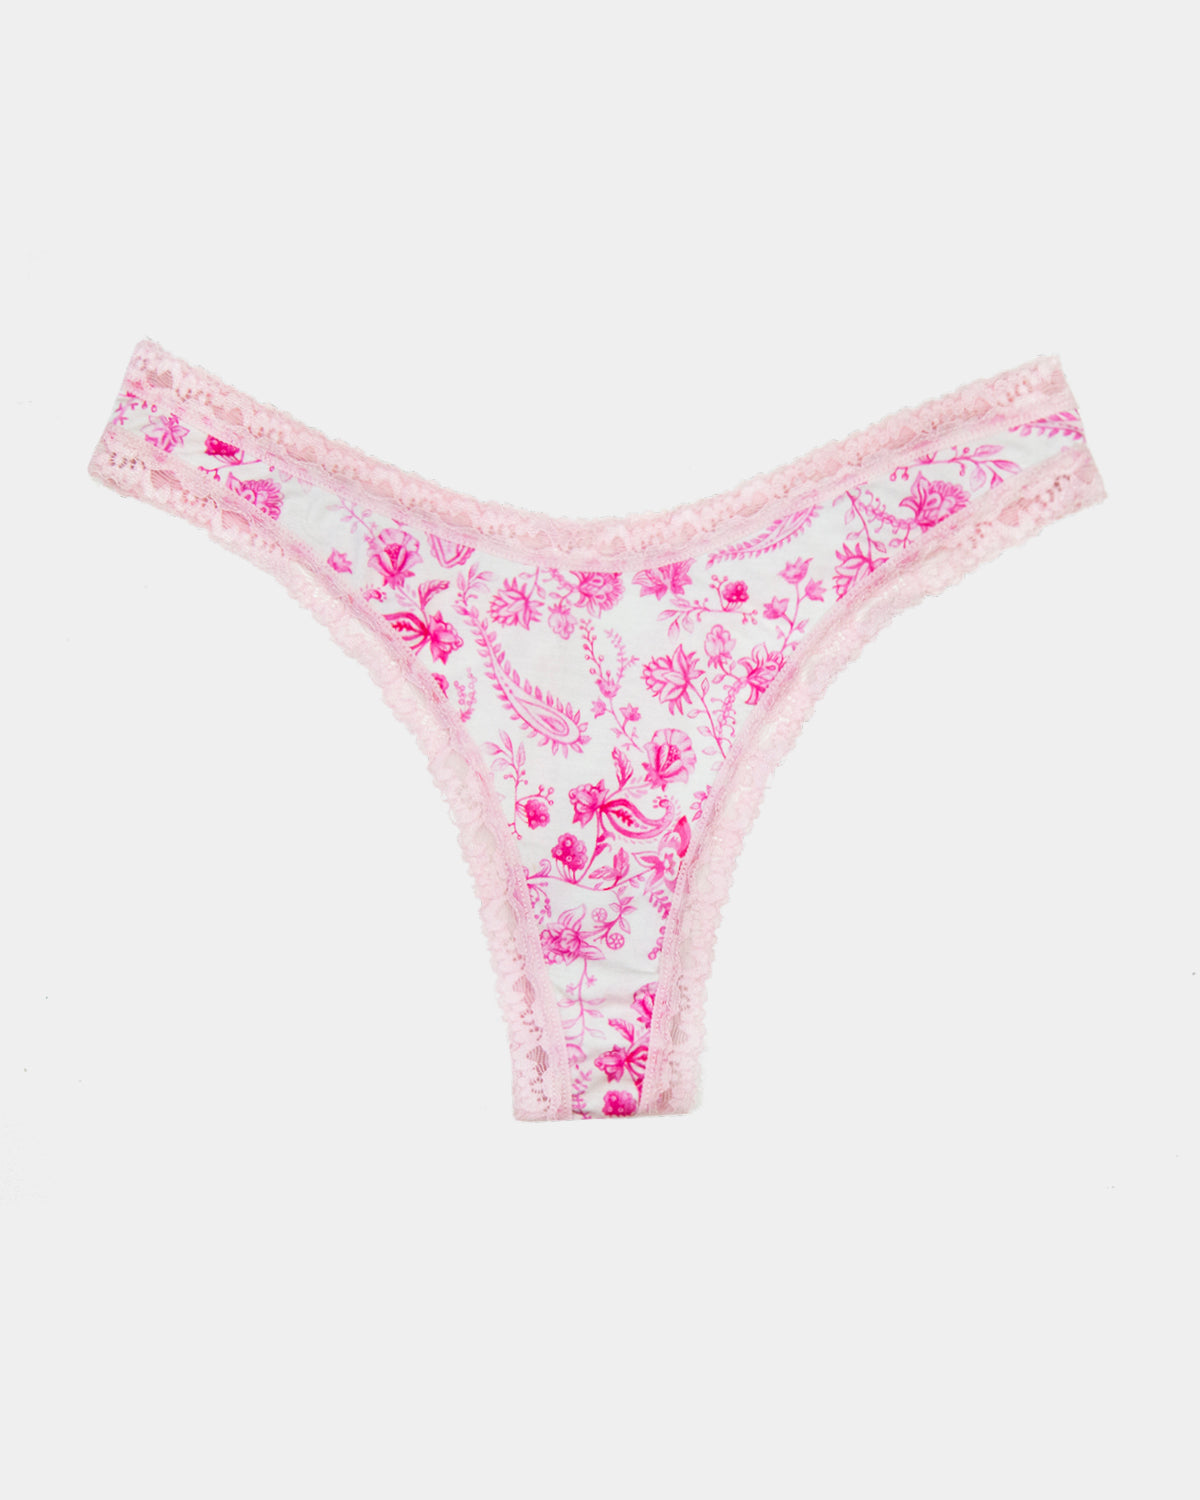 Thong - Pink Spring Paisley | Sustainable TENCEL™ Lace Underwear ...